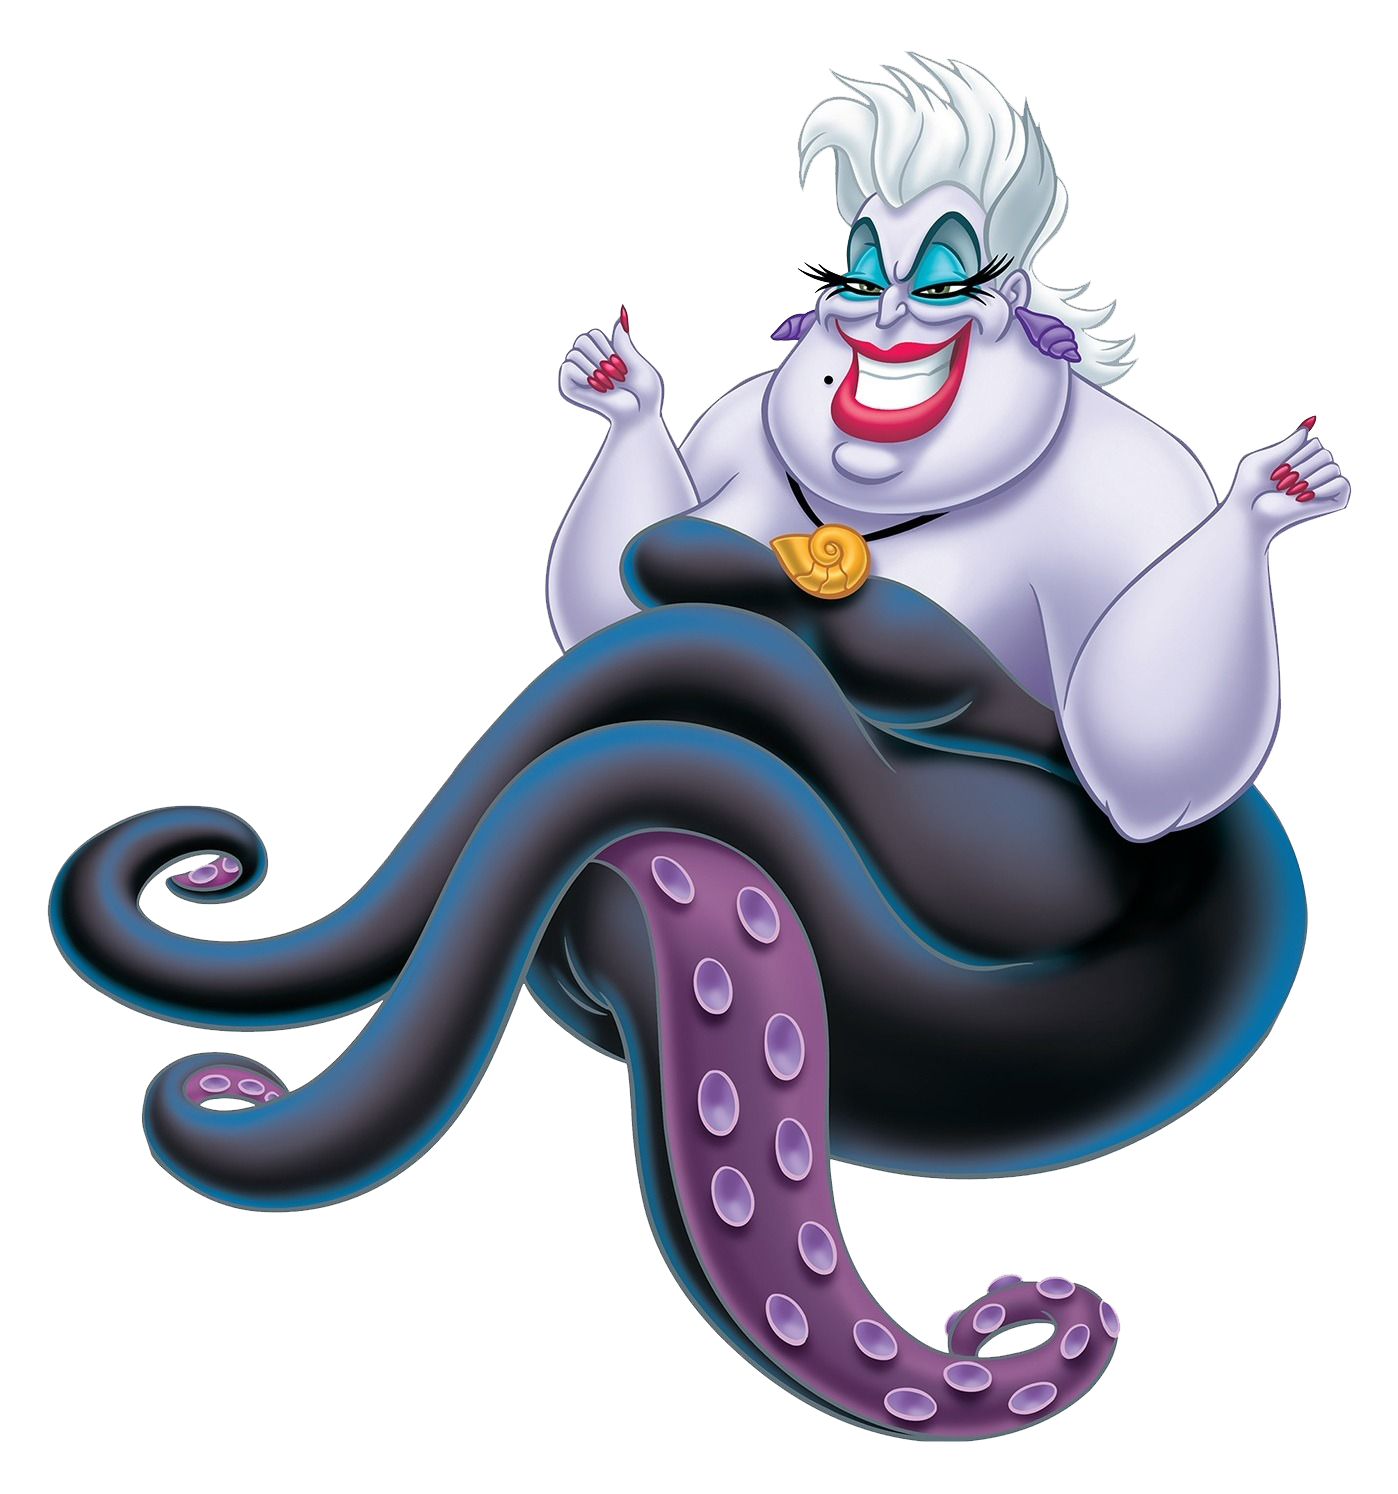 List 93+ Images ursula from little mermaid pictures Full HD, 2k, 4k